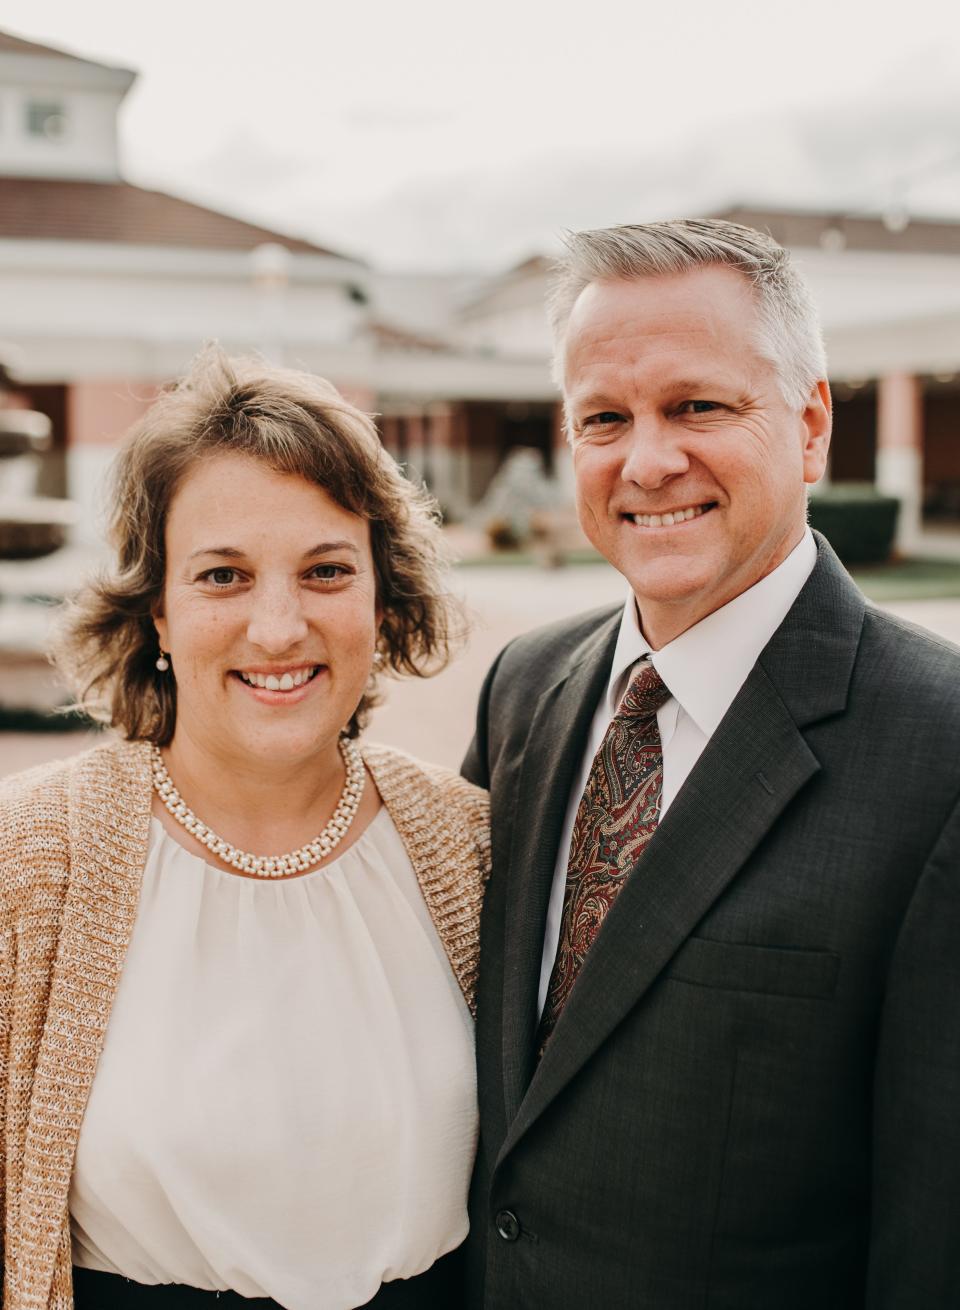 Westminster Christian Academy announced the appointment of Ray Casey (right) as the school’s new president effective Monday, June 20, 2022. Pictured with him is his wife, Esther.